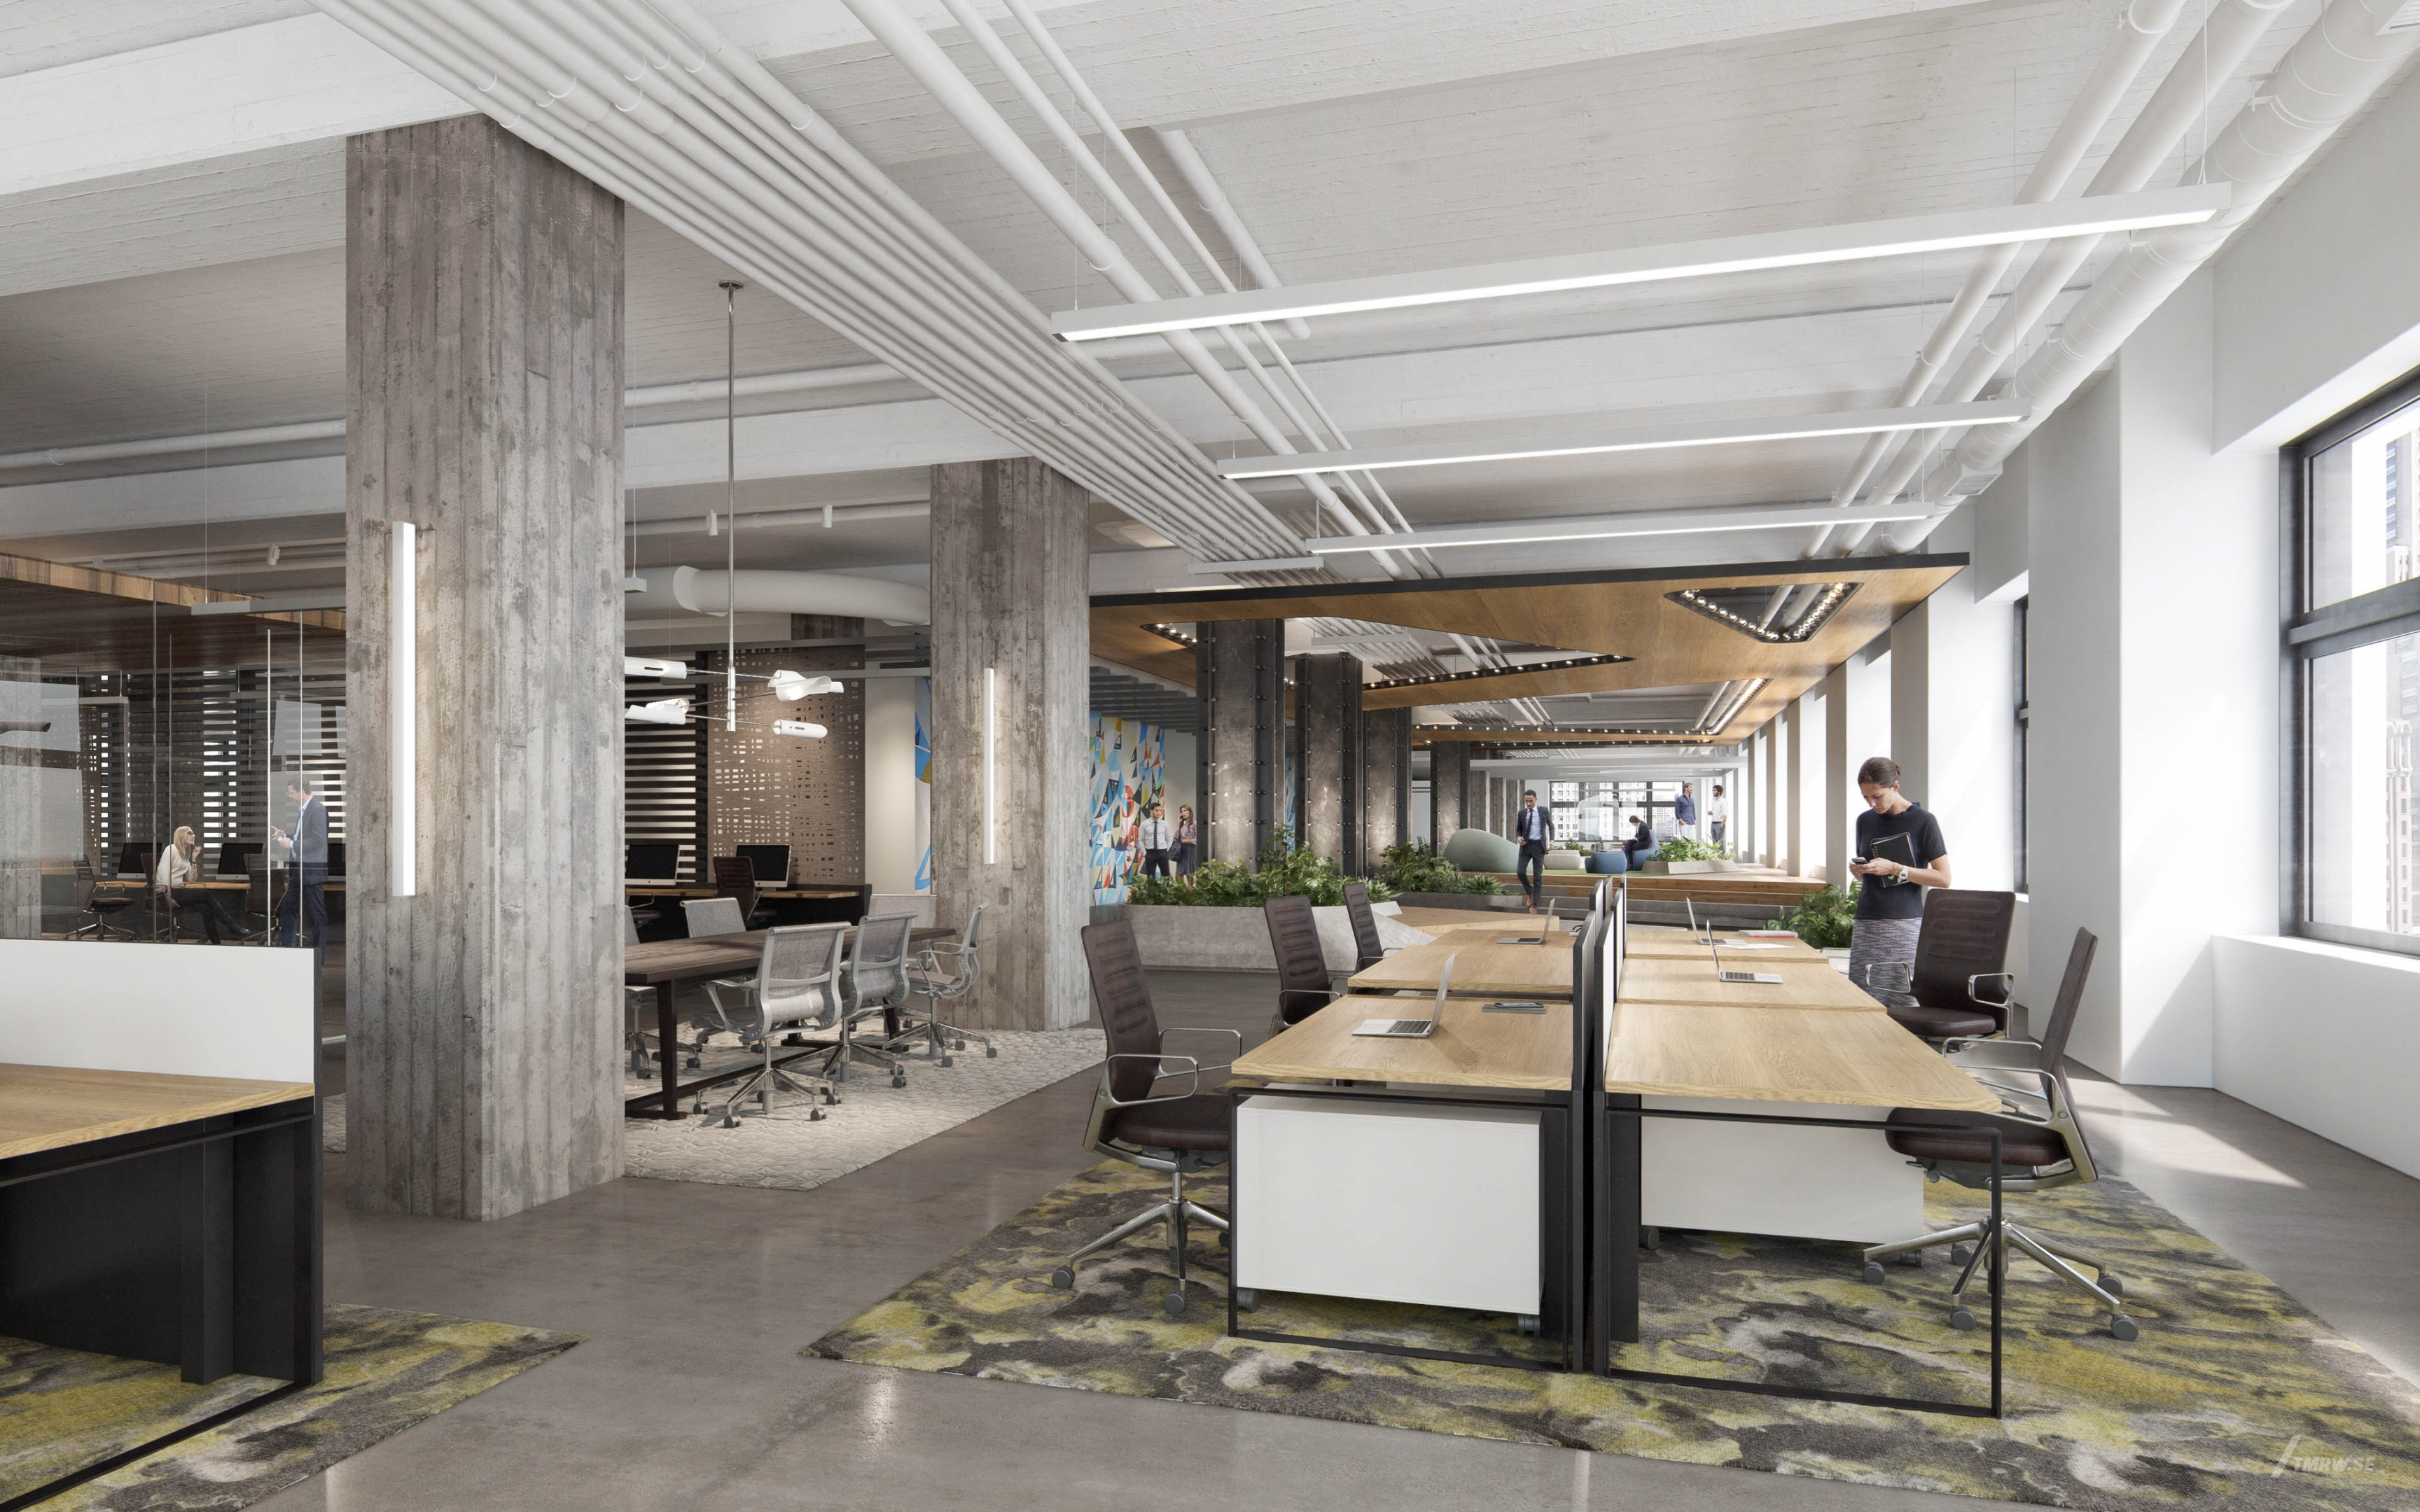 Architectural visualization of 5 Penn Plaza for Gensler, a office in day light from an interior view.